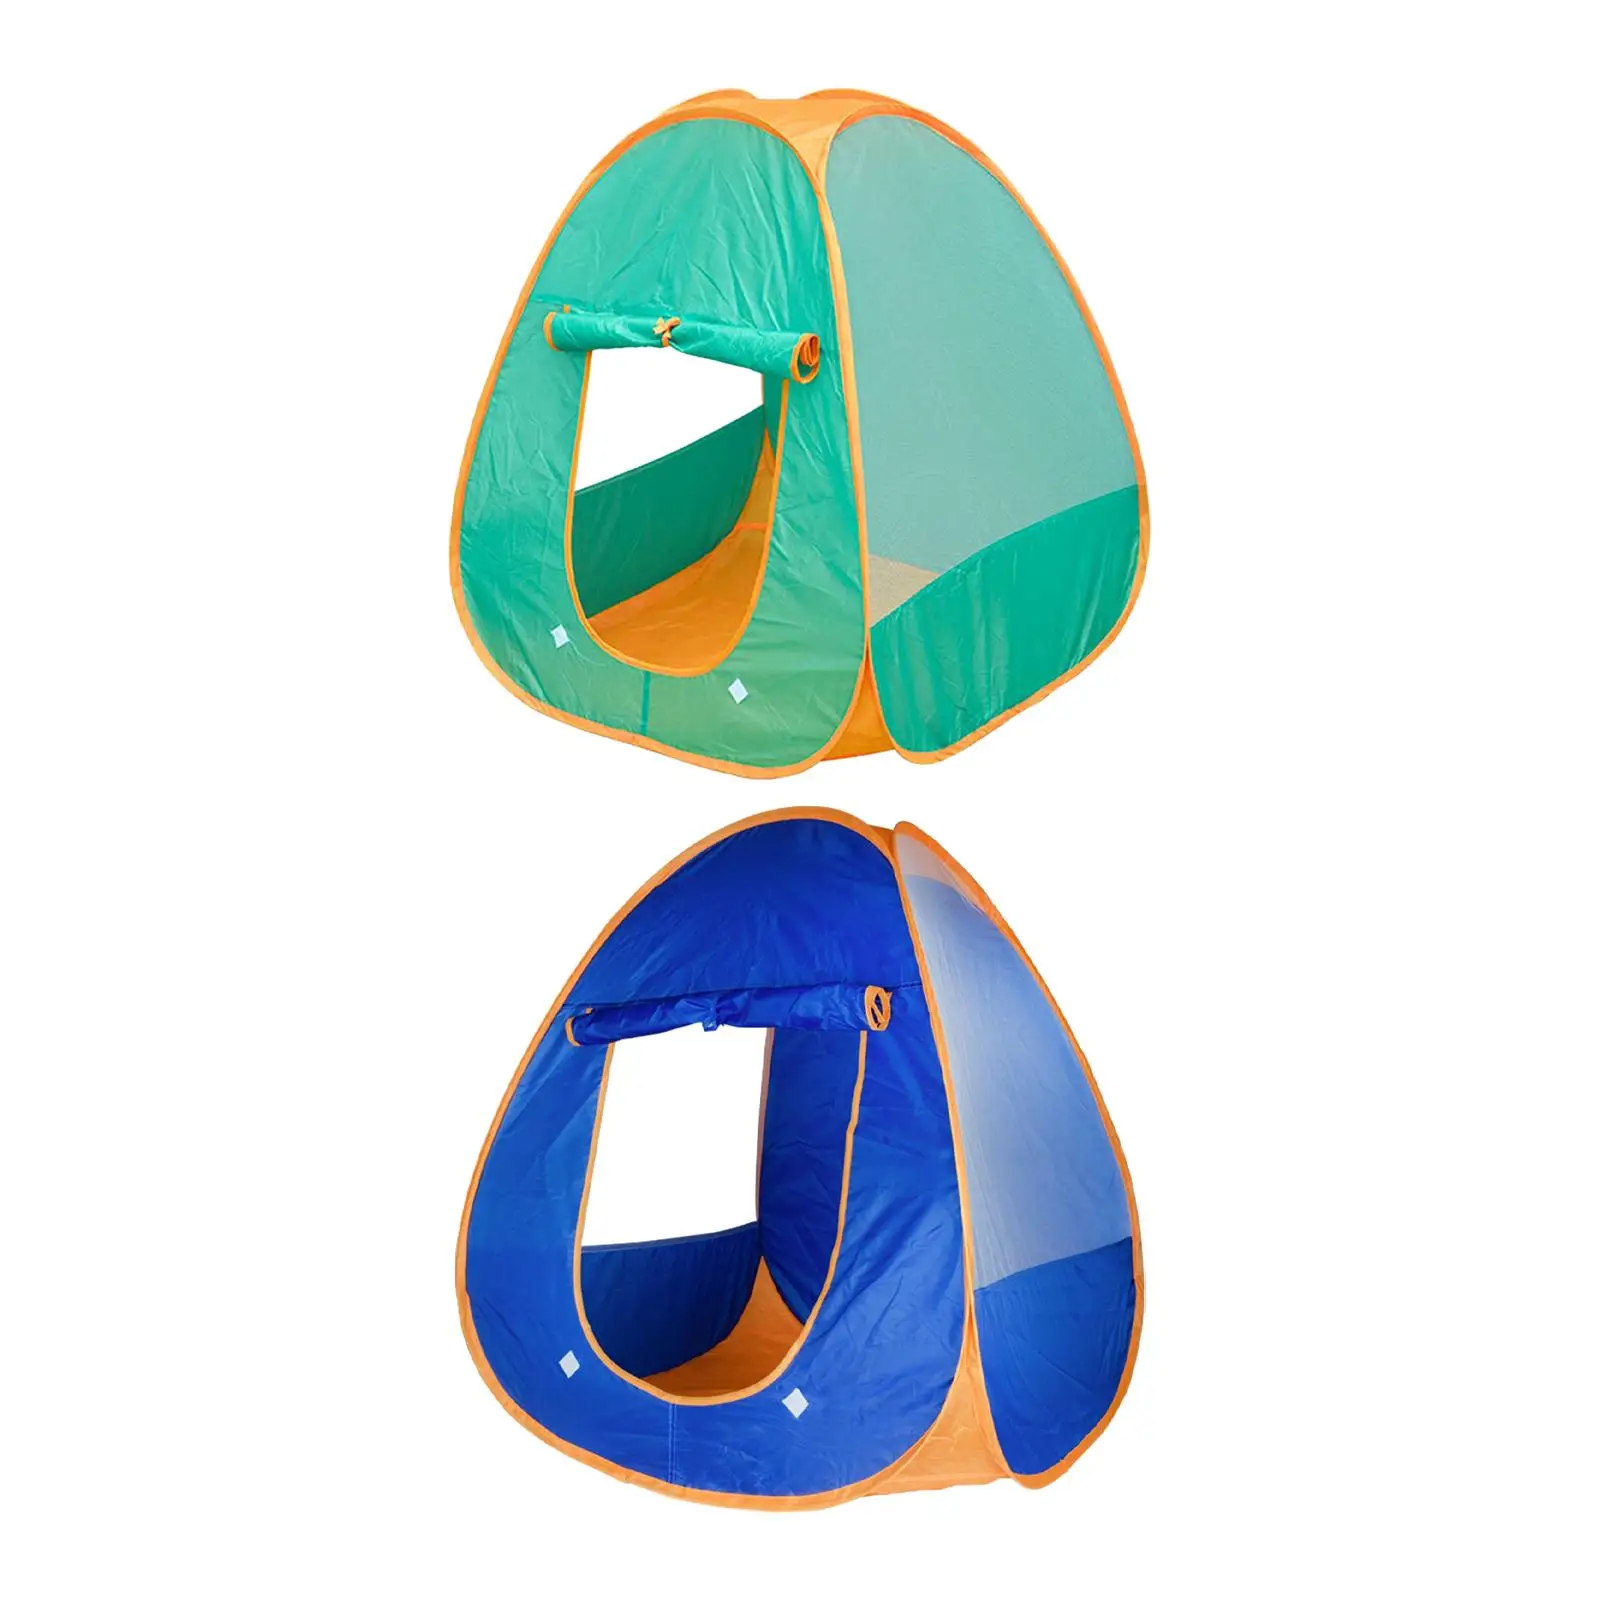 Kids Play Tent Foldable Role Play Toy for Nursery Room Indoor Outdoor Beach